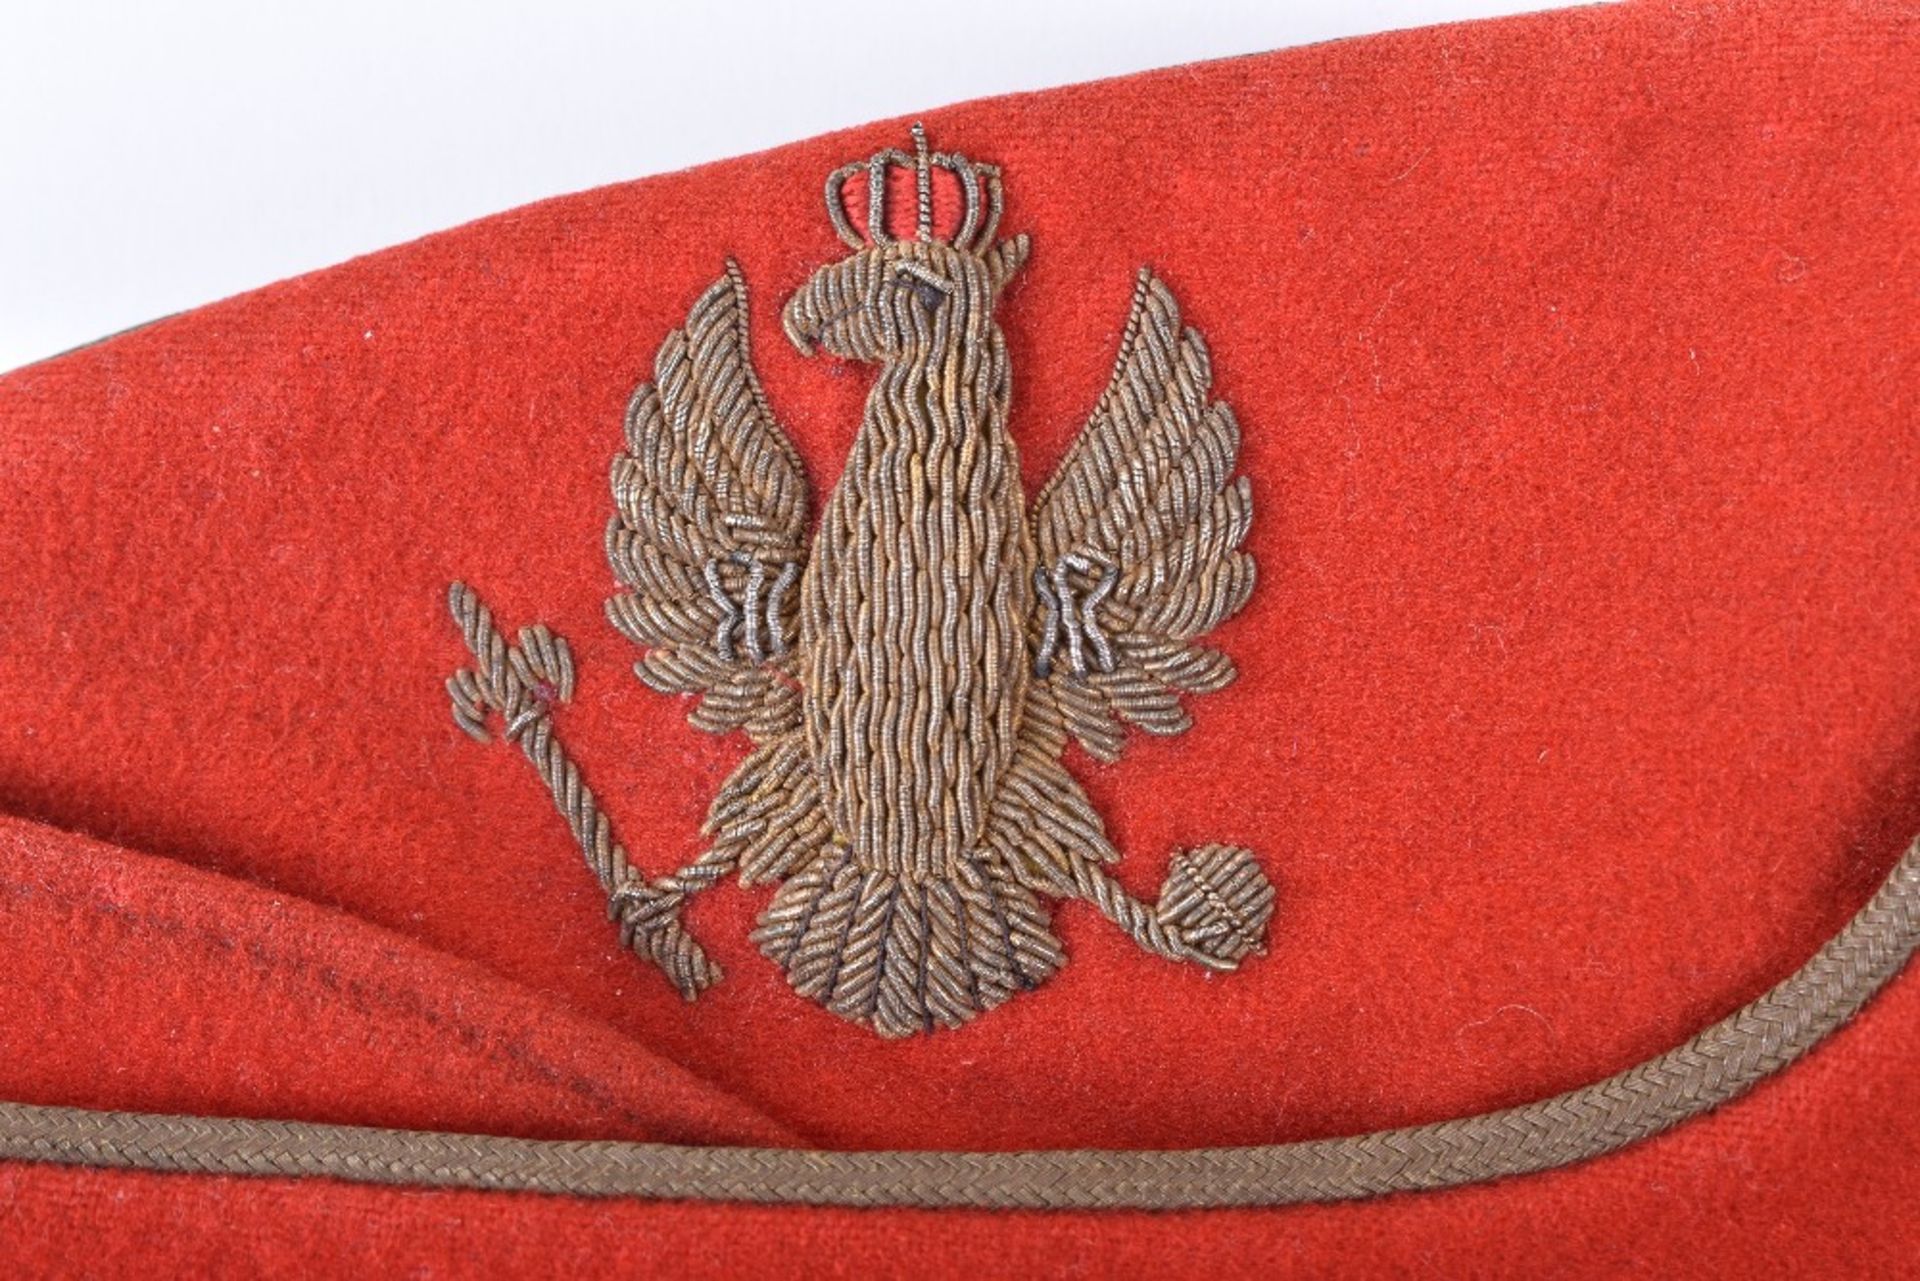 British 14th / 20th Hussars Officers Coloured Field Service Cap - Image 2 of 6